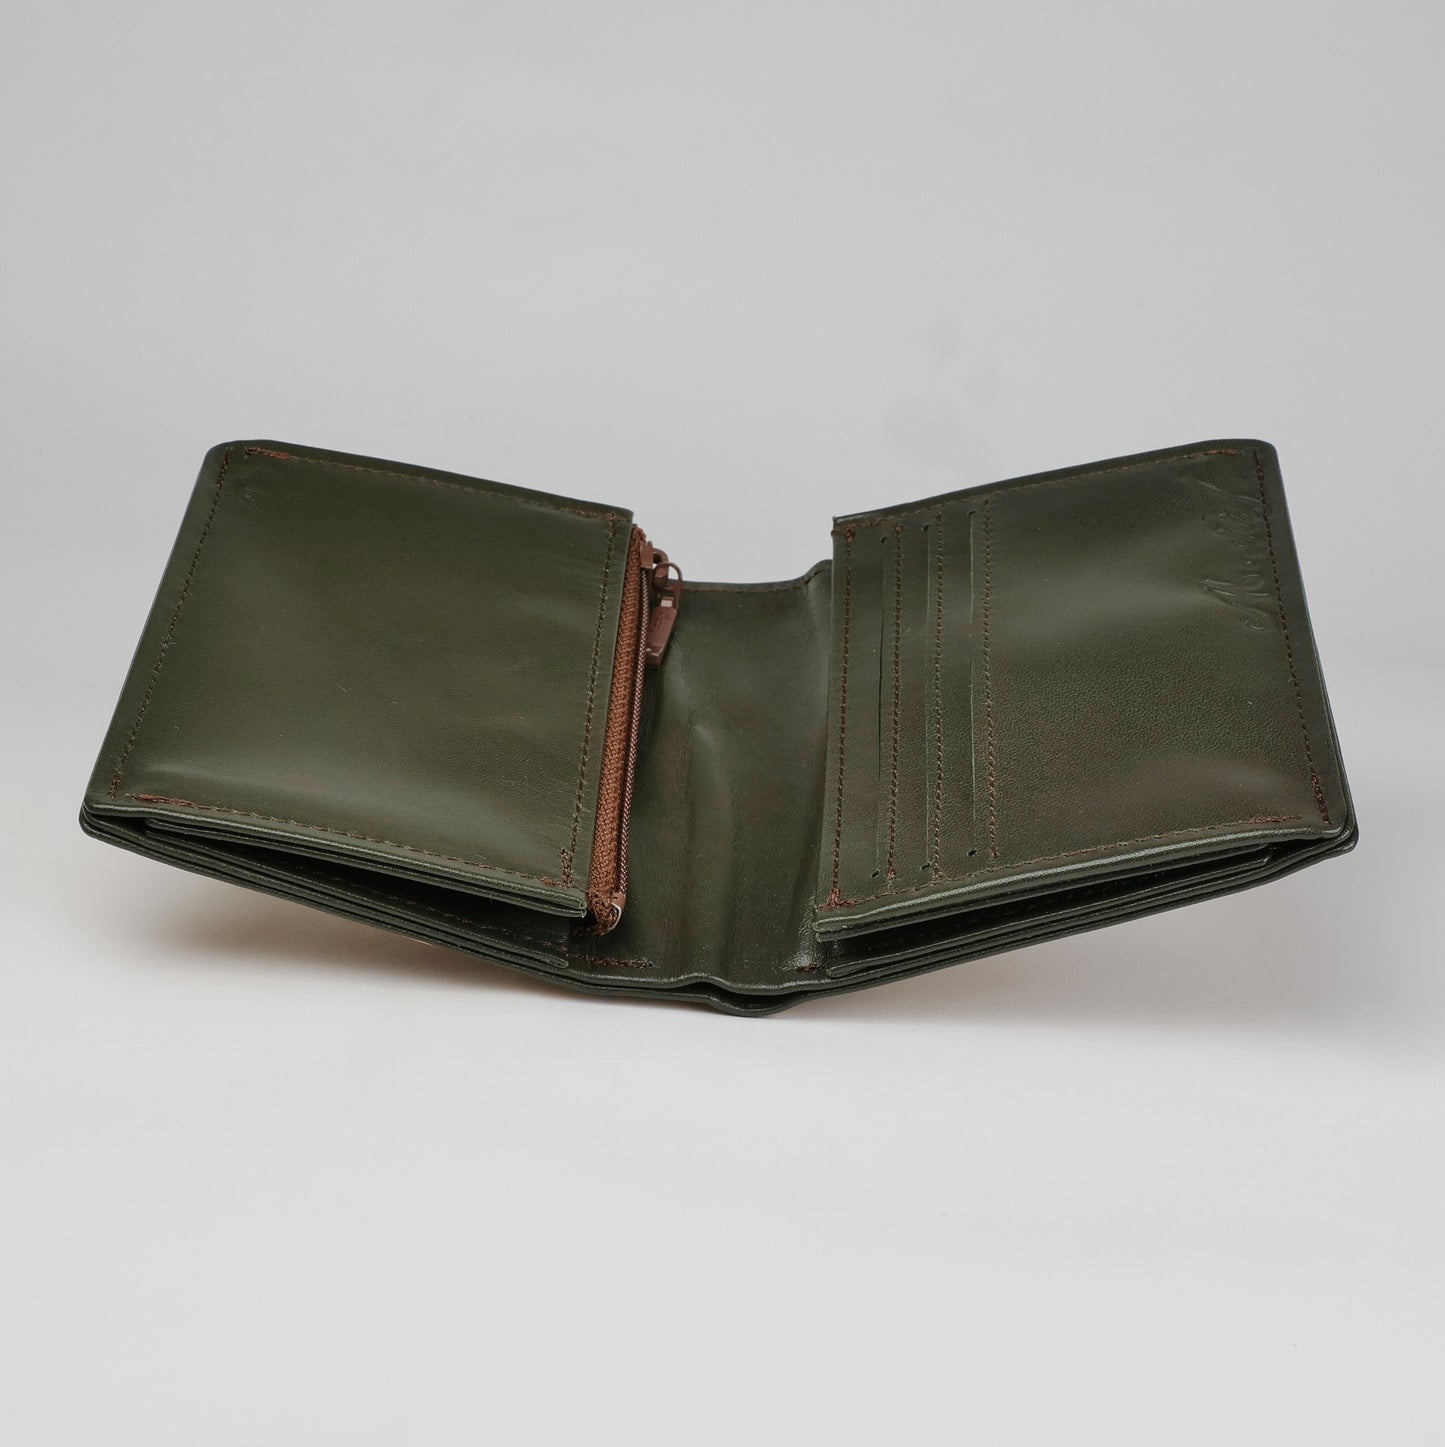 Bamboo Bifold Wallet, Gift for Dad, Gift for hasbund, Japanese bifold wallet, bamboo wallet,